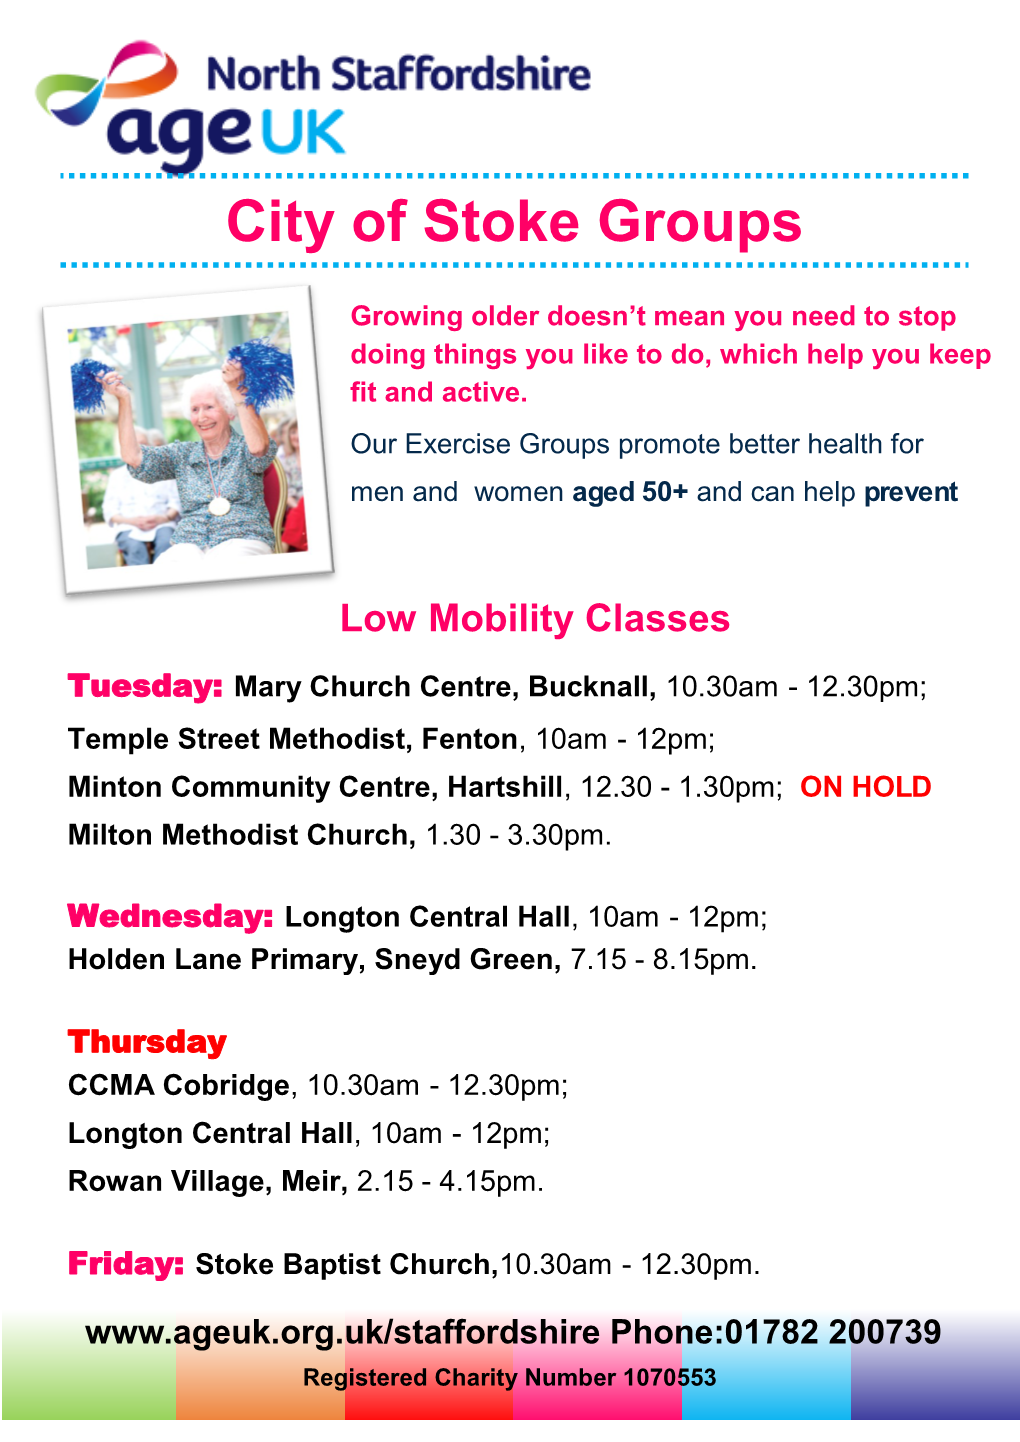 City of Stoke Groups